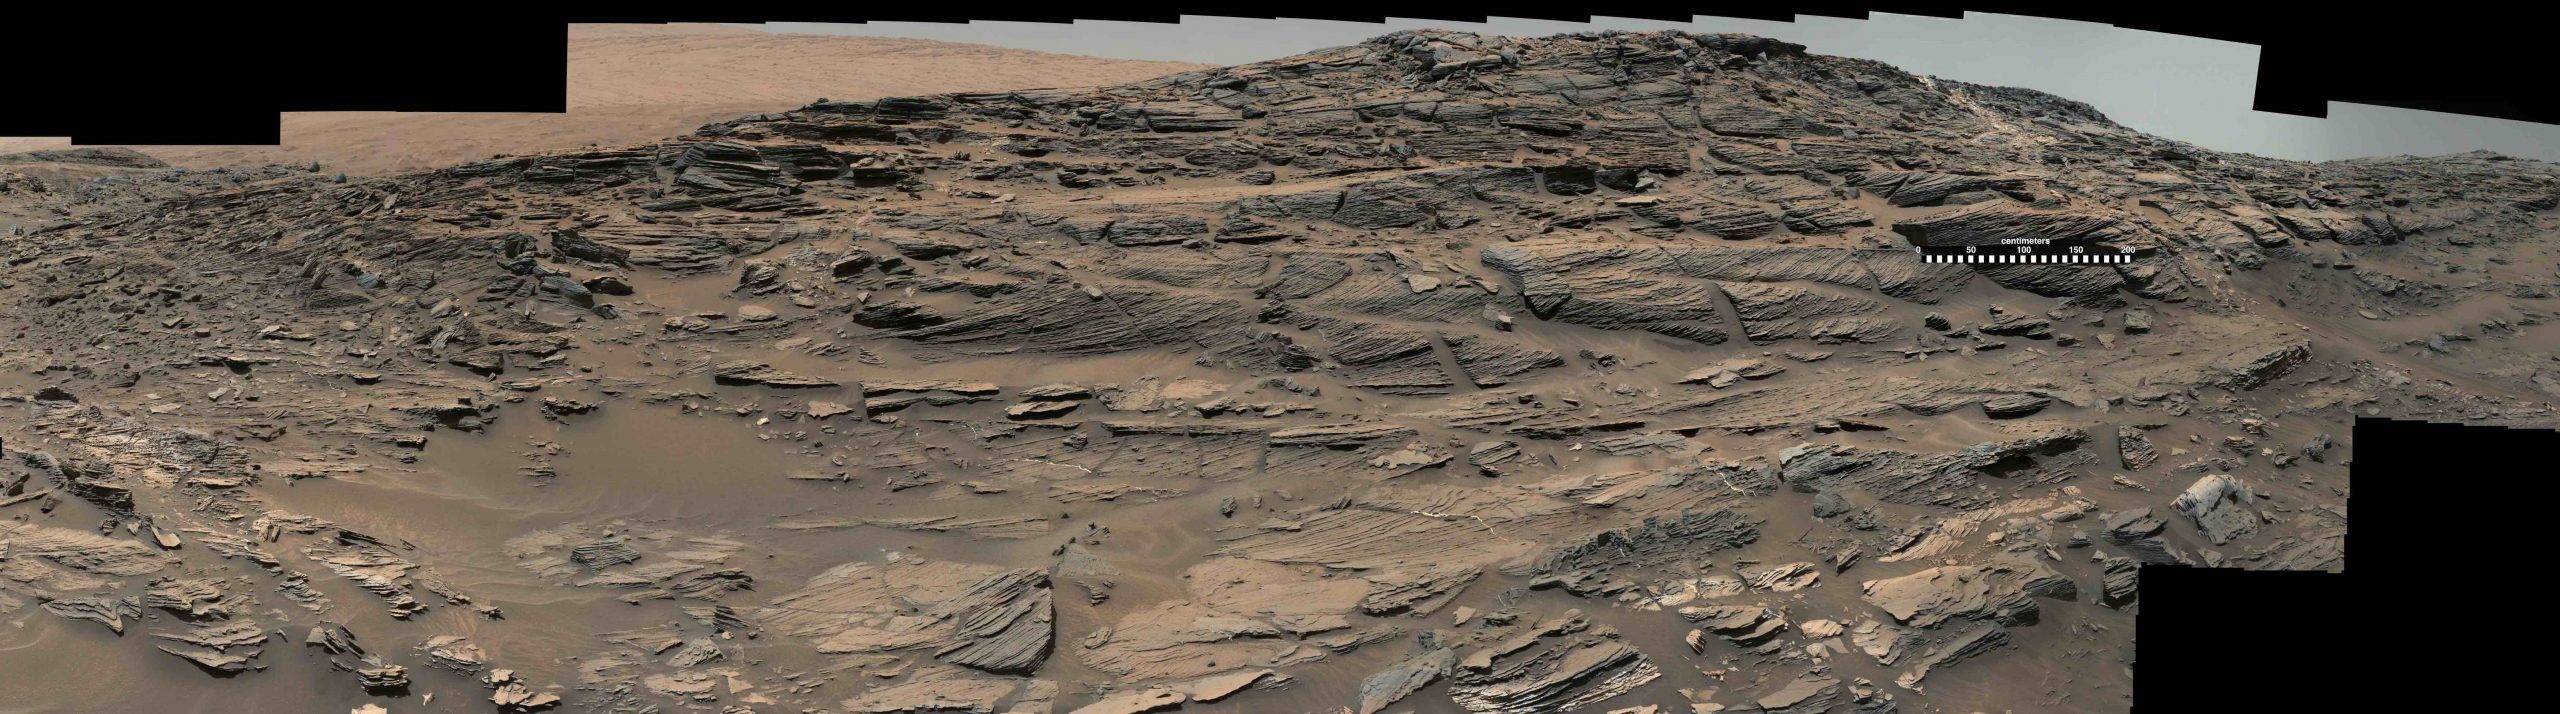 Cross-bedding outcrop at Whale Rock, Mars.